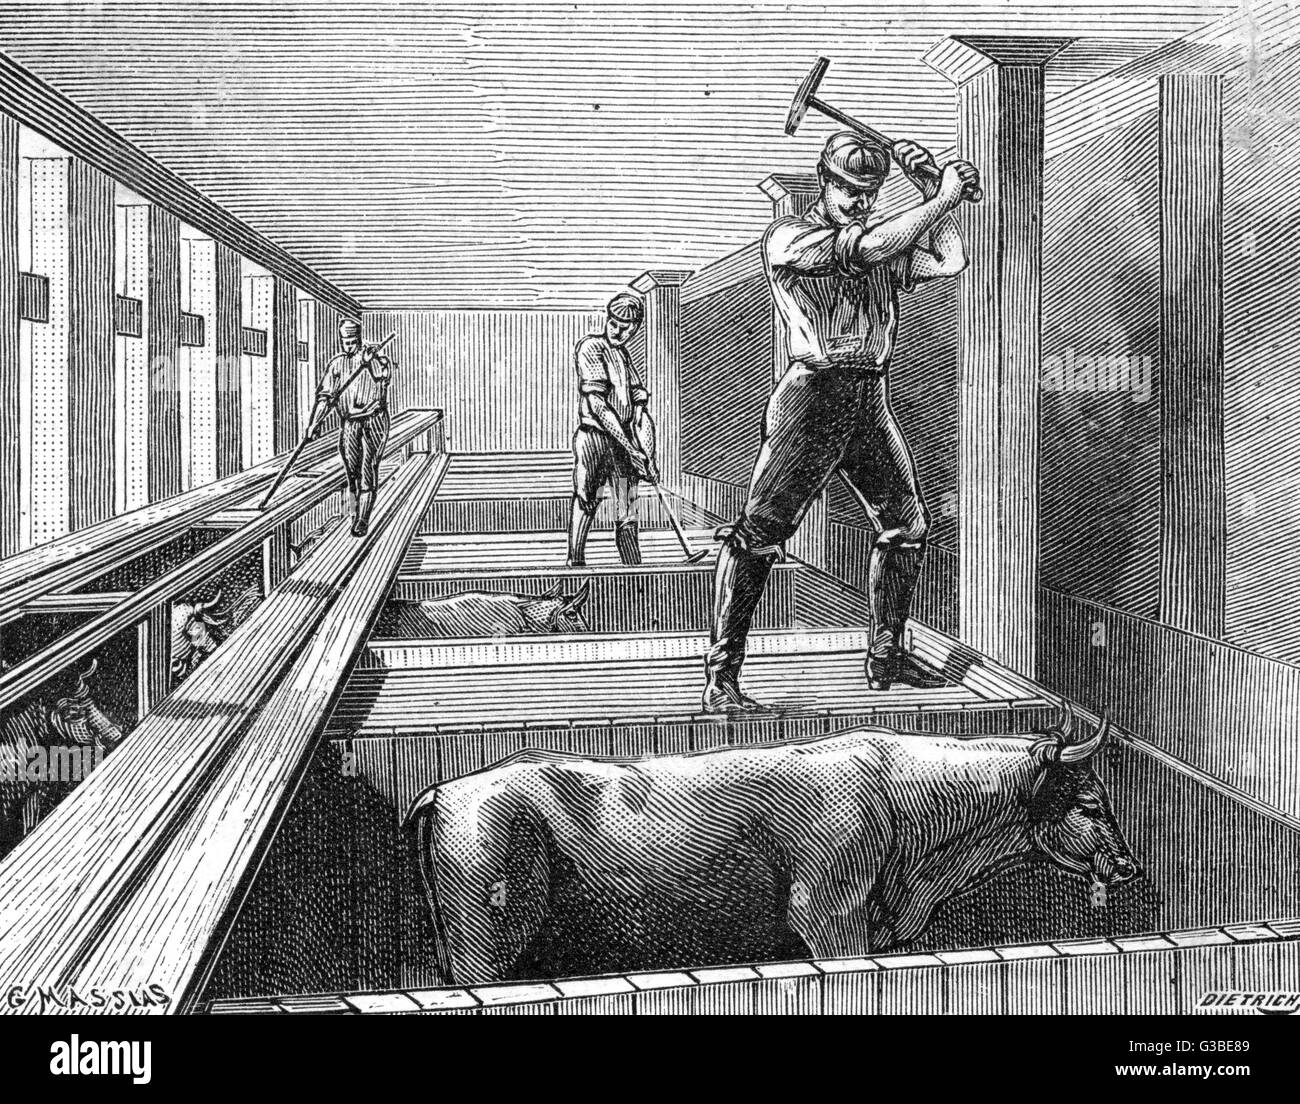 SLAUGHTERING BEEF 1895 Stock Photo